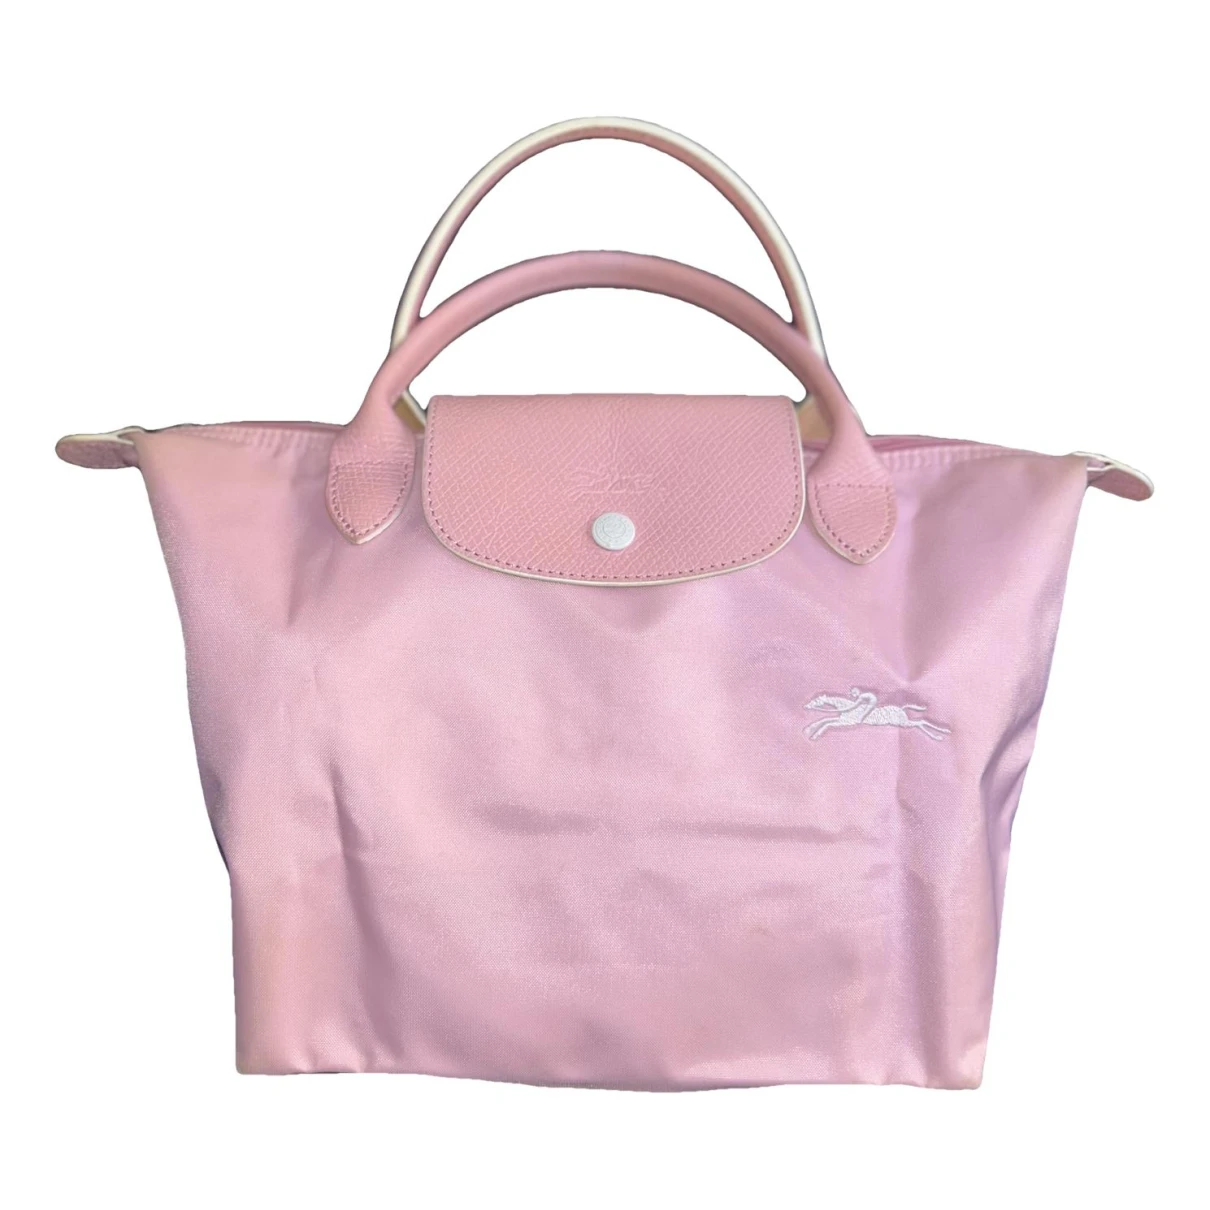 Pre-owned Longchamp Pliage Cloth Handbag In Pink